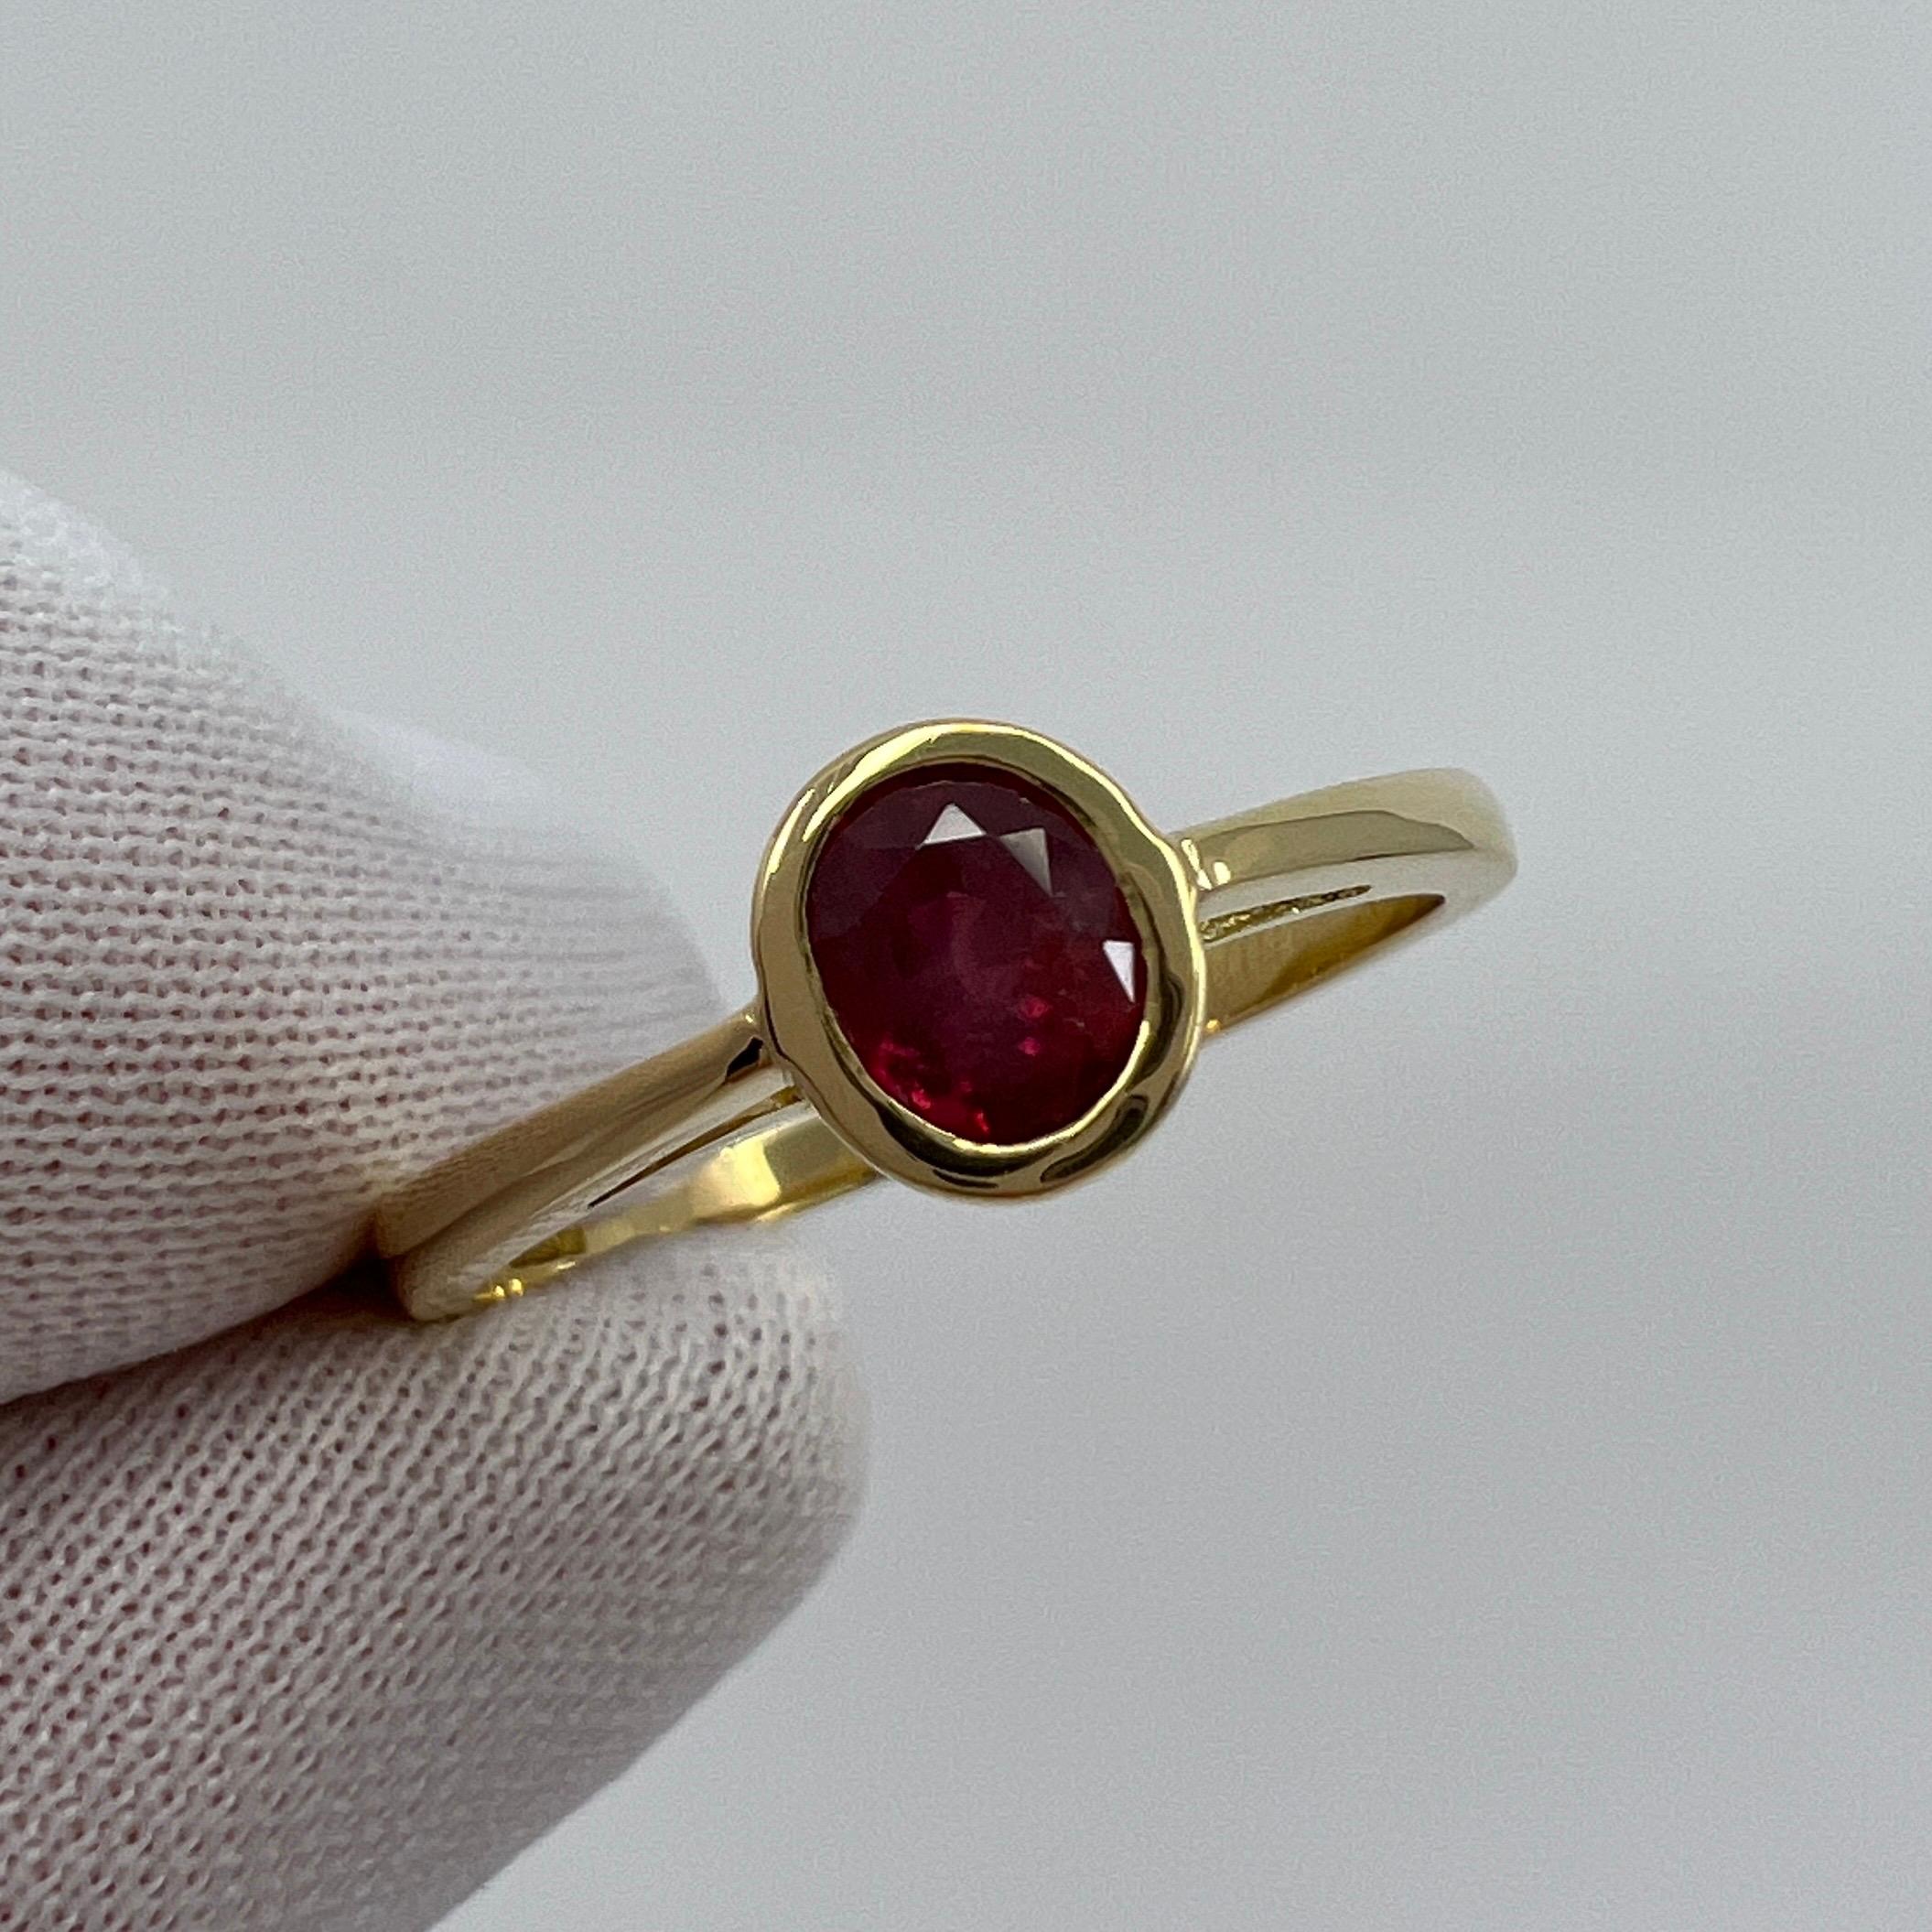 0,75ct Vivid Red Ruby Oval Cut 18k Gelbgold Lünette Rubover Solitaire Ring im Angebot 1